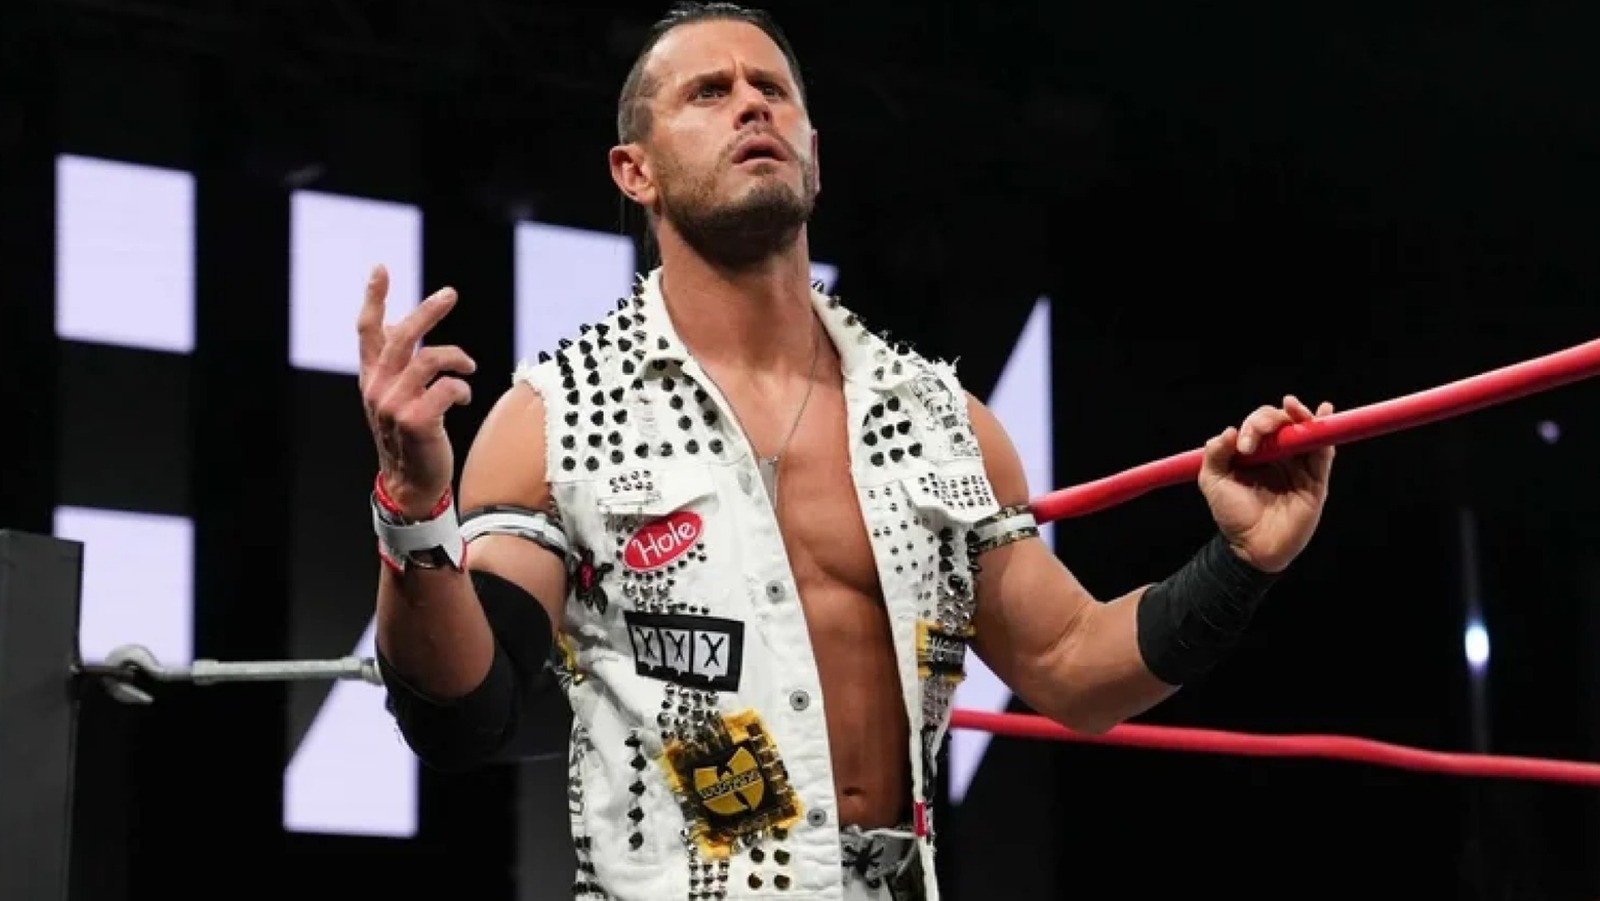 Alex Shelley Discusses MCMG's Future Amid Reported AEW Interest